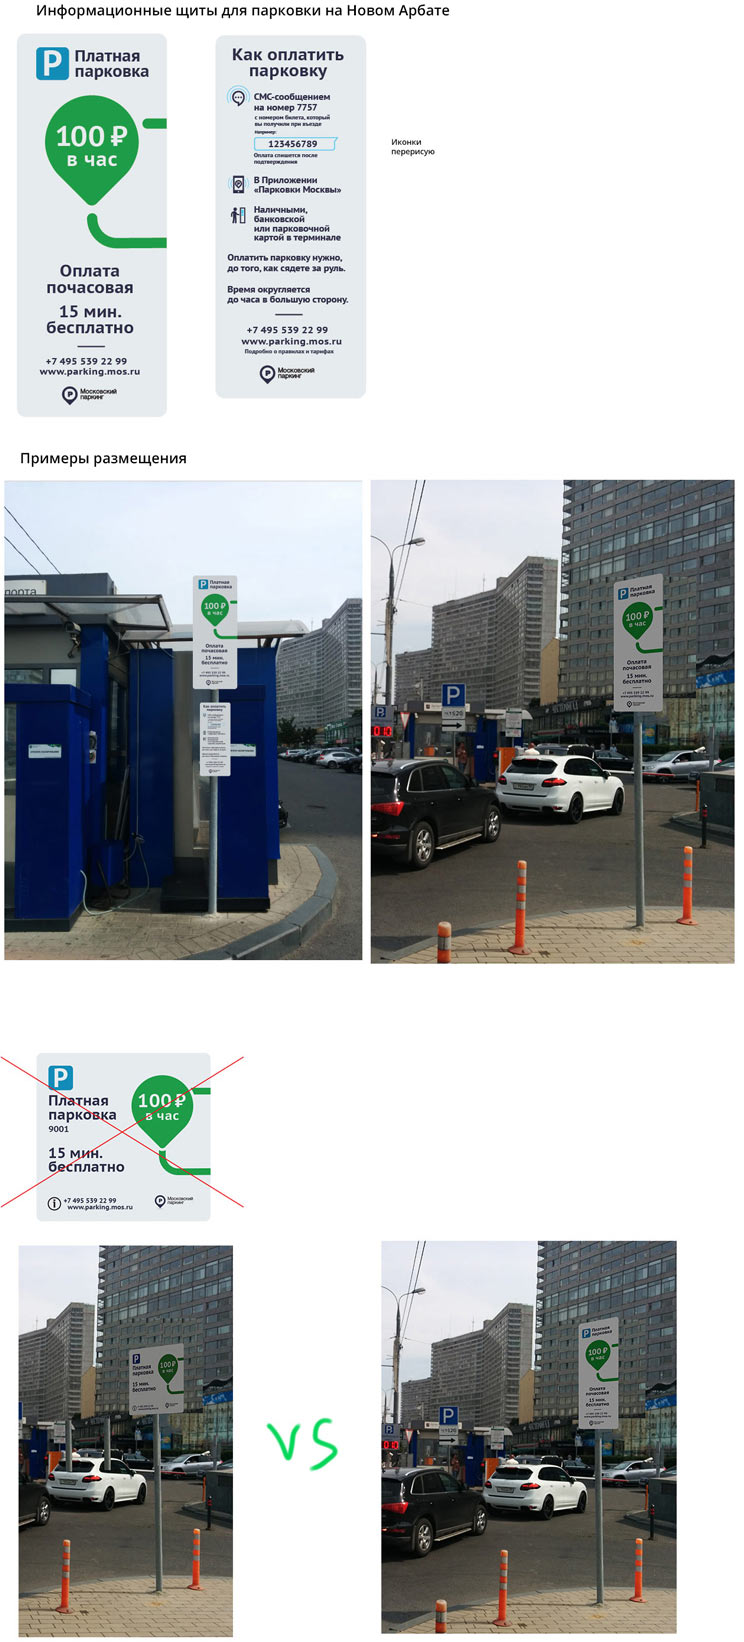 moscow parking process 17